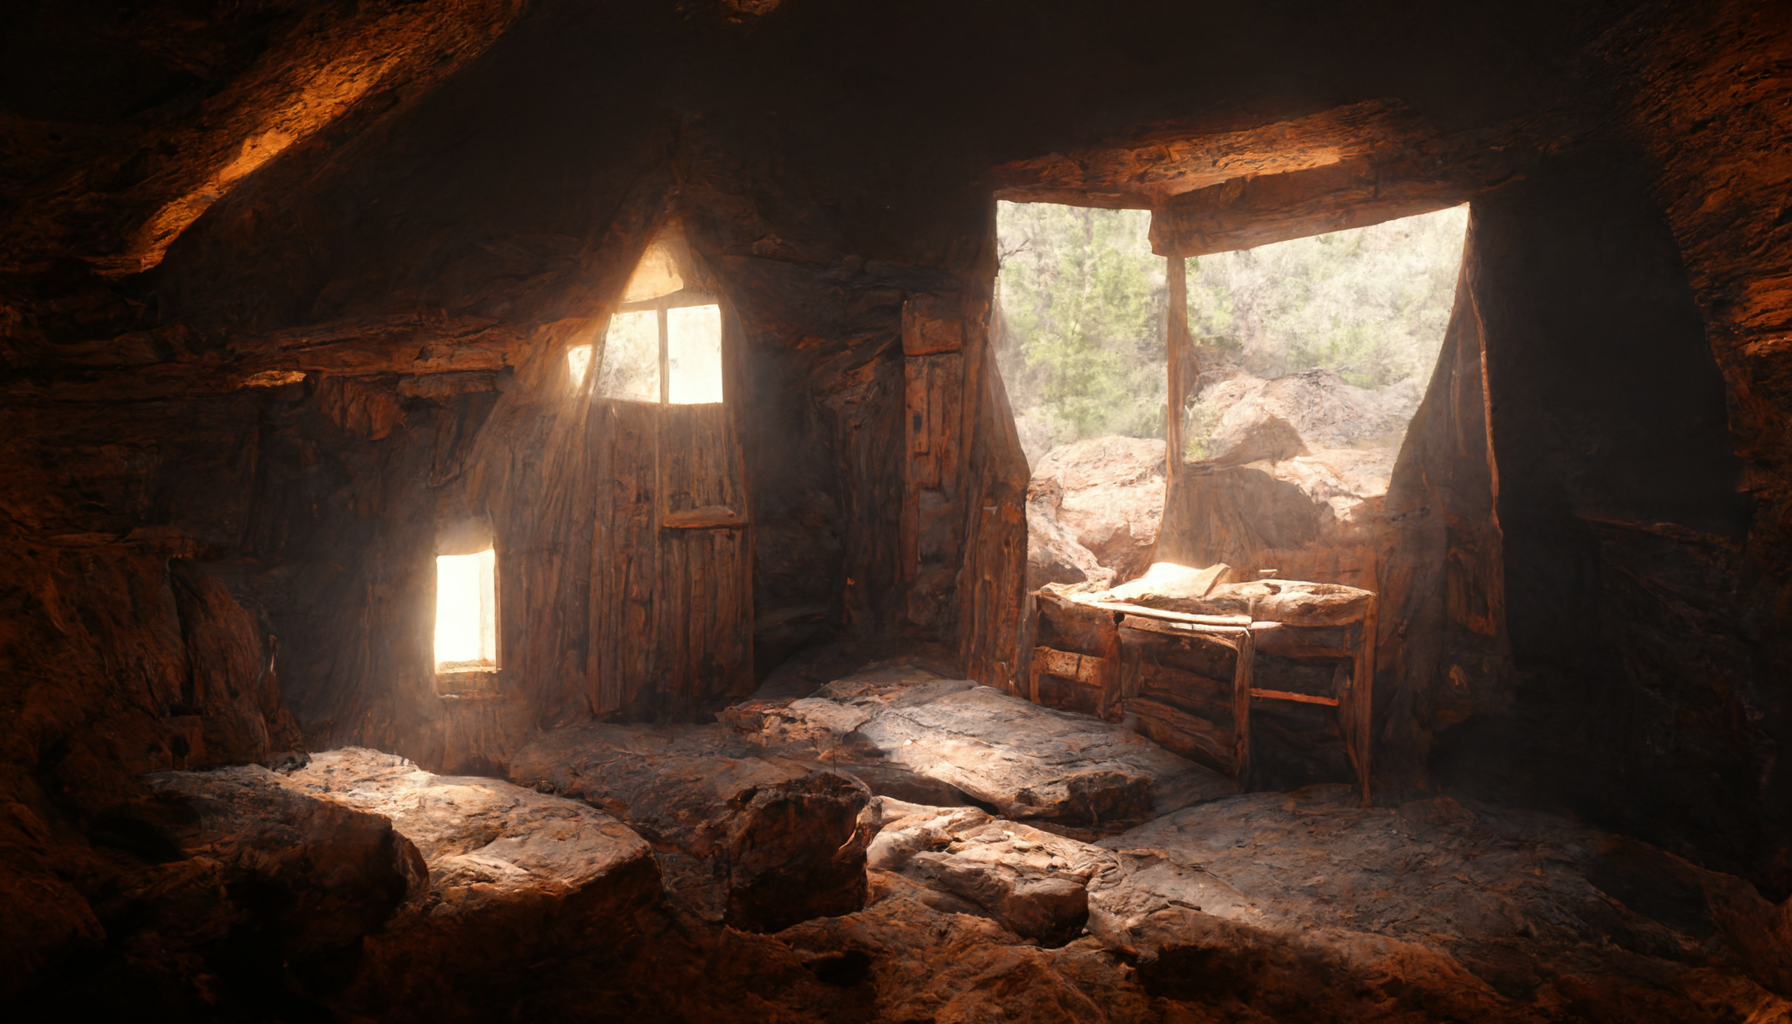 Displaying a file named Grunderwear_united_states_1880_old_miners_cabin_ebedded_in_moun_1ec2787e-dacc-45f9-b398-bec4c8885ecf.png